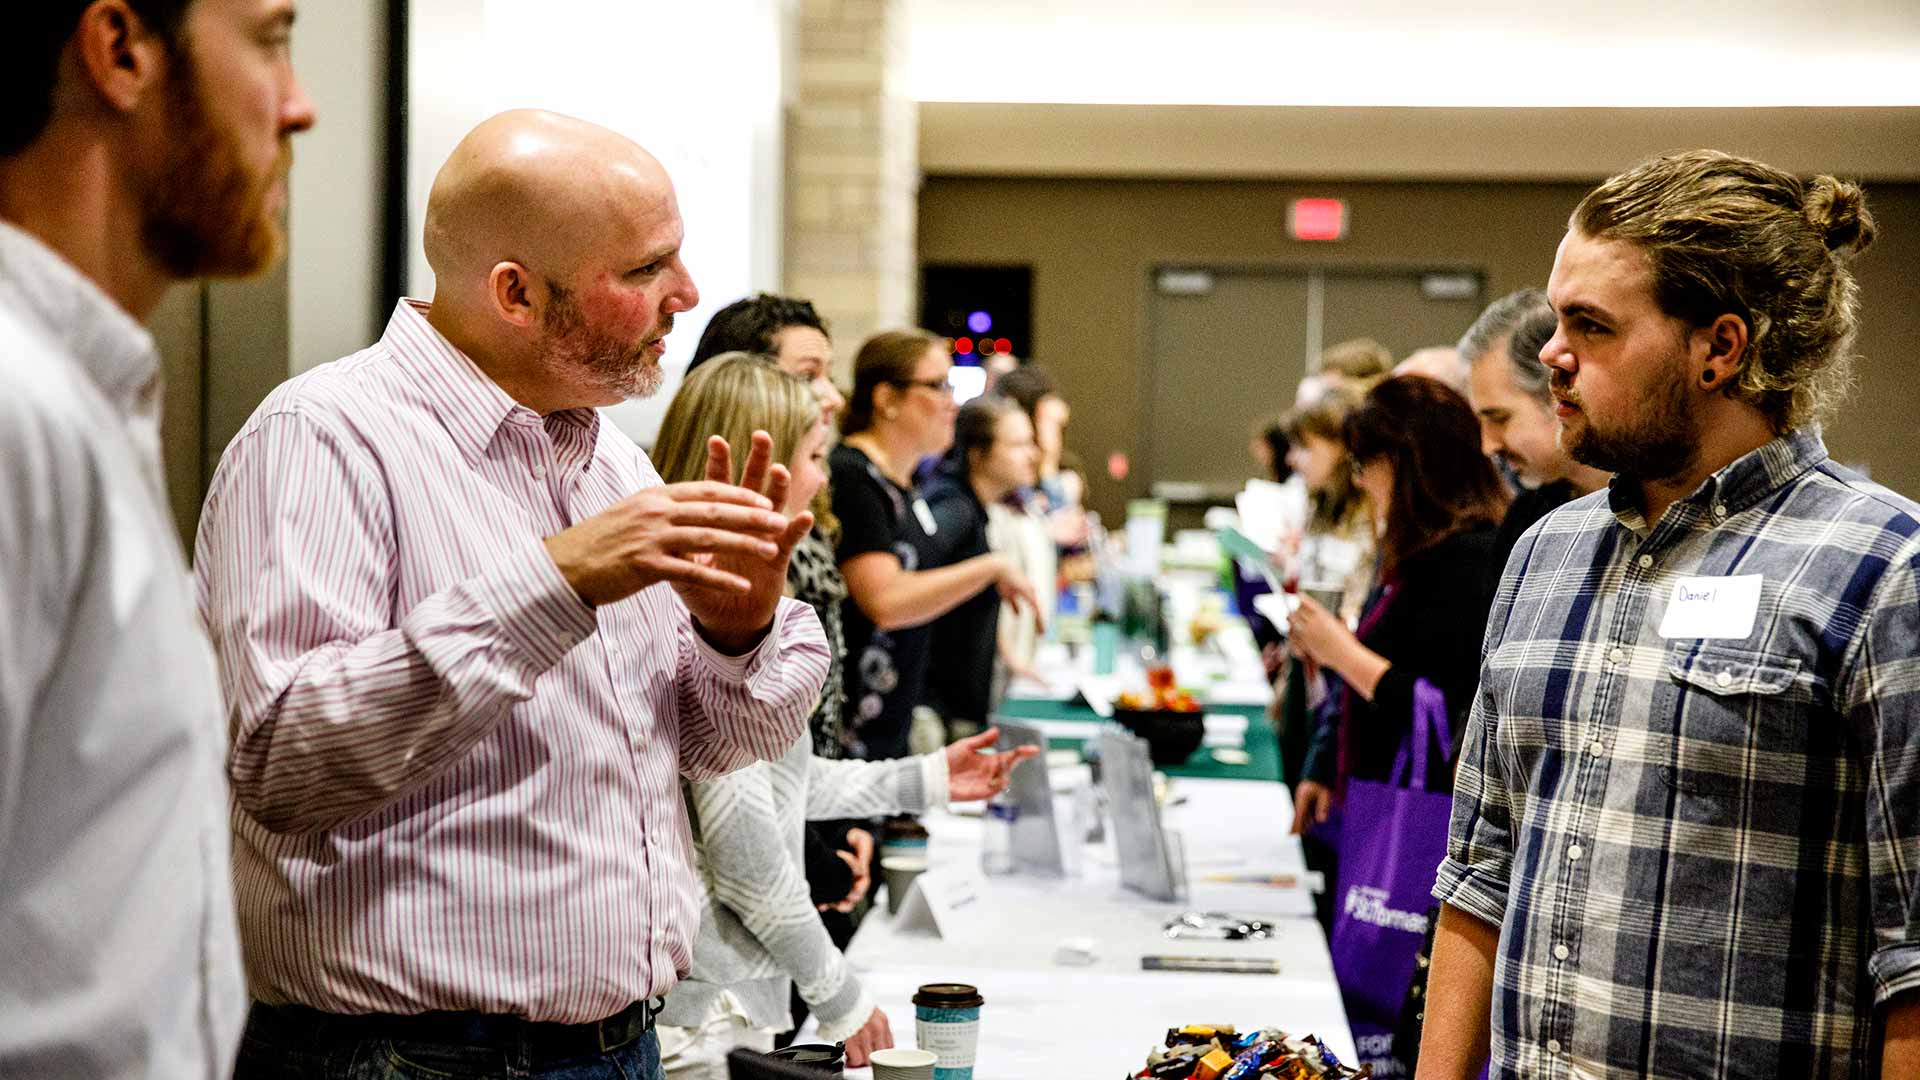 Student talking to a professional at University of St. Thomas event